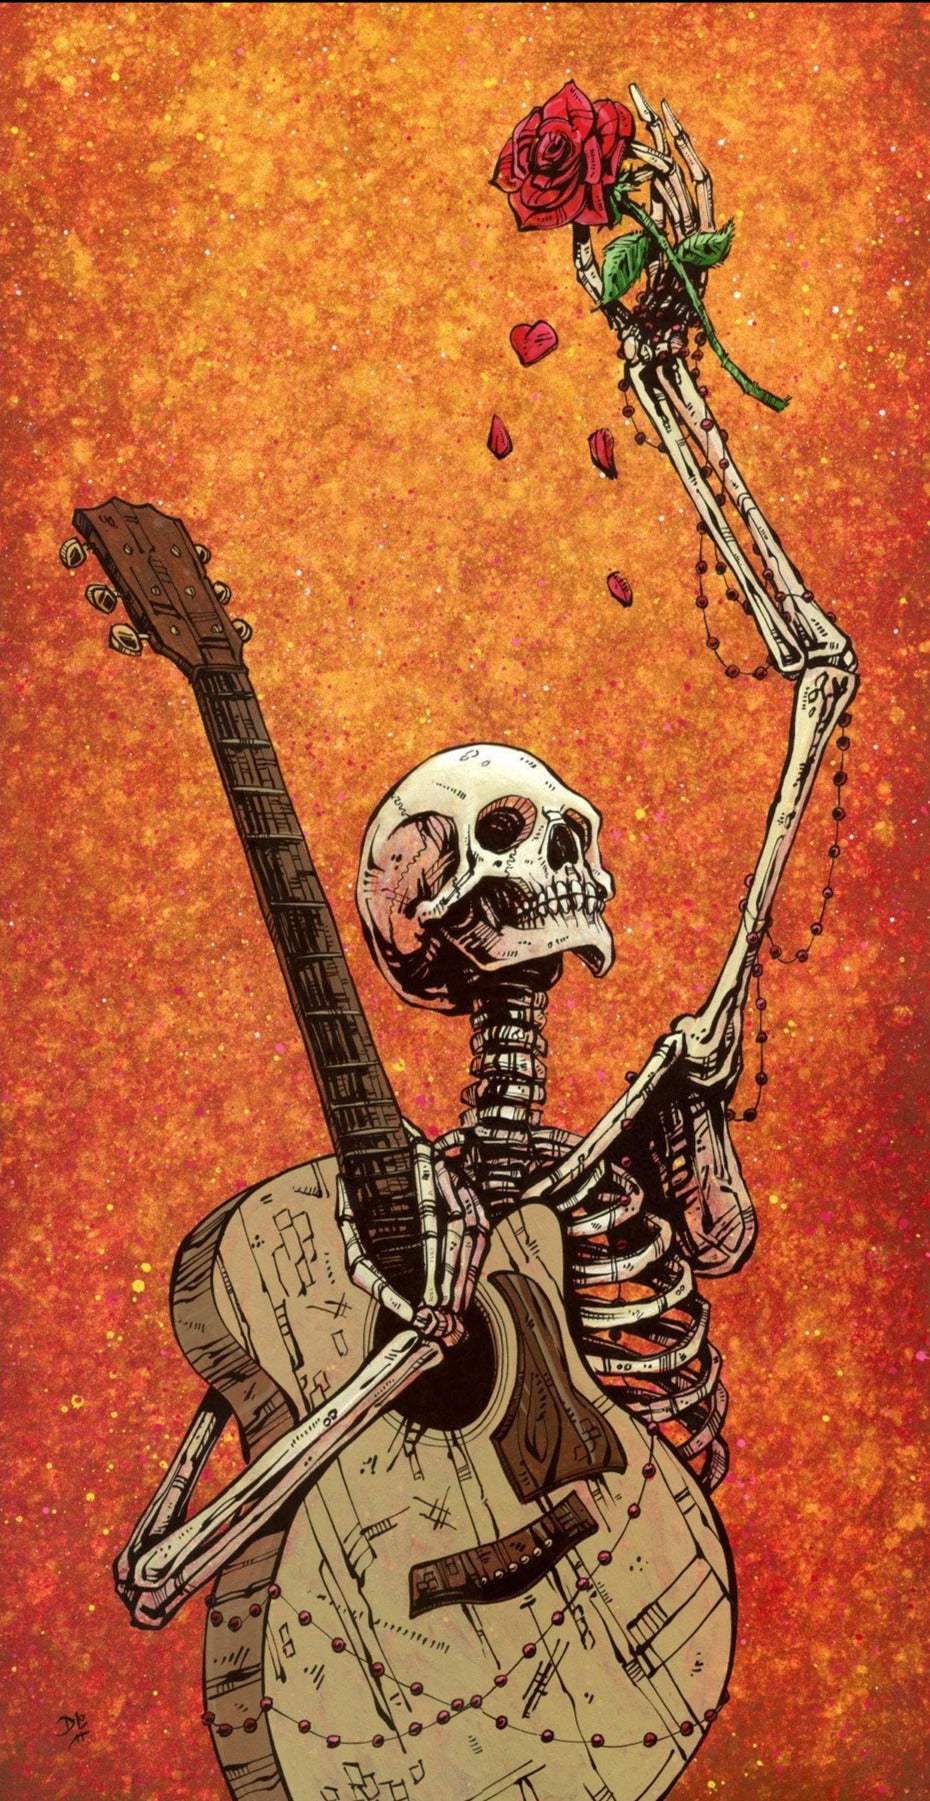 Until the Last Note by Day of the Dead Artist David Lozeau, Day of the Dead Art, Dia de los Muertos Art, Dia de los Muertos Artist